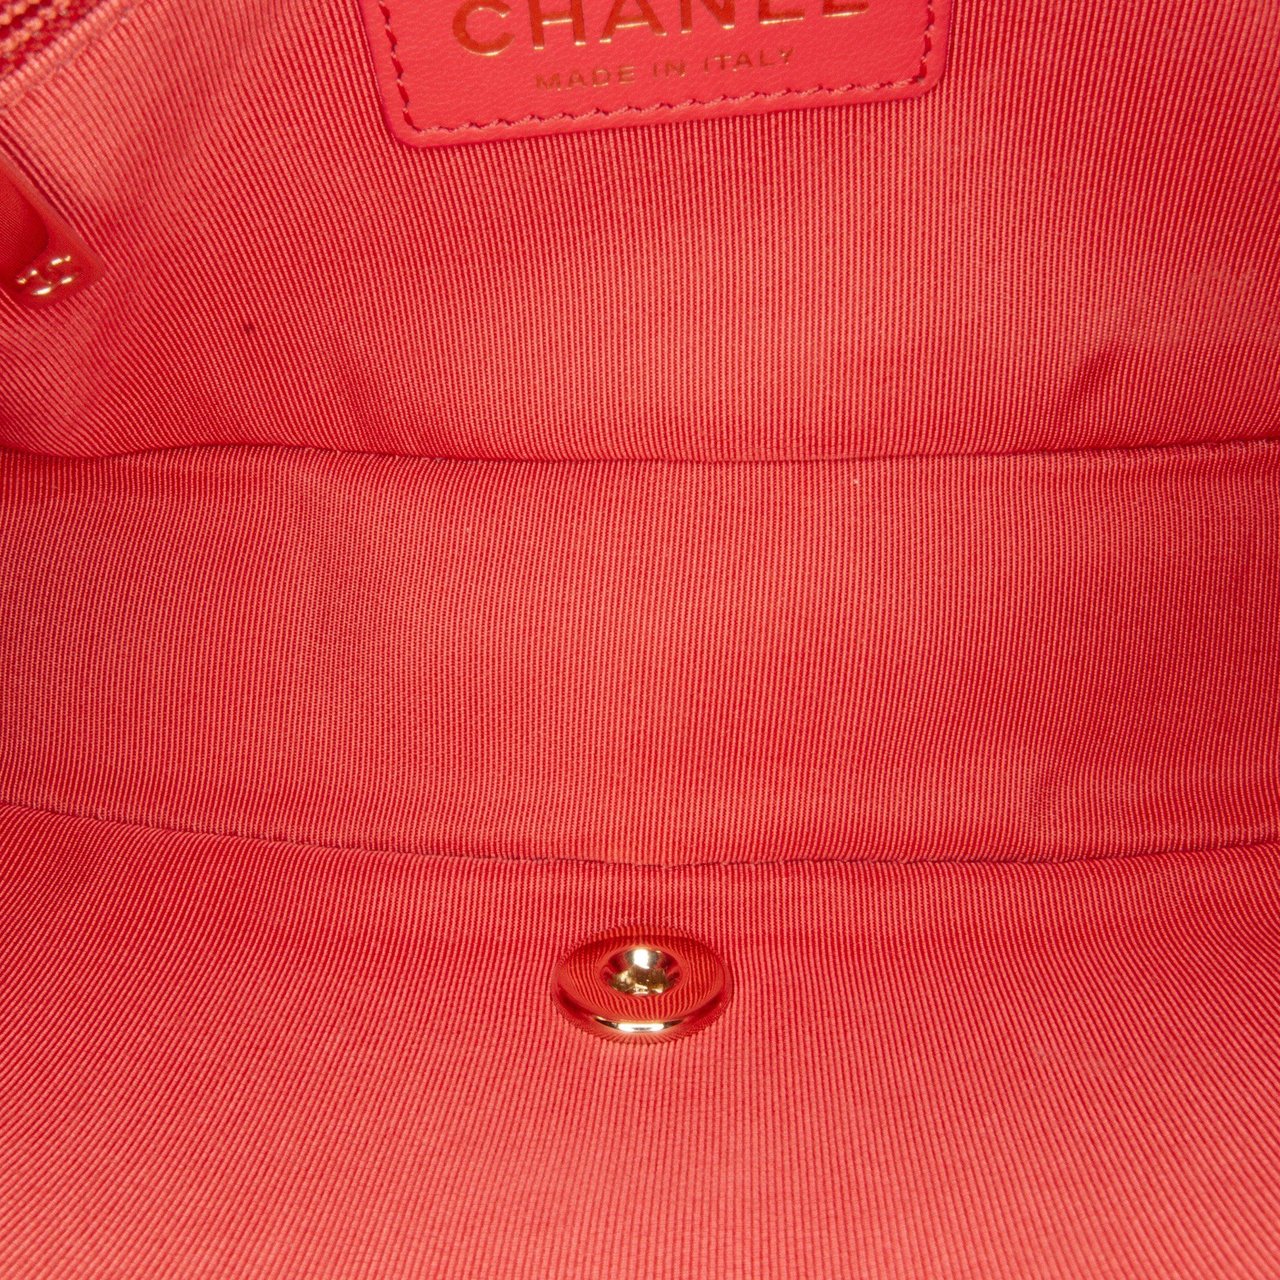 Chanel Small Mademoiselle Vintage Flap Bag Roze